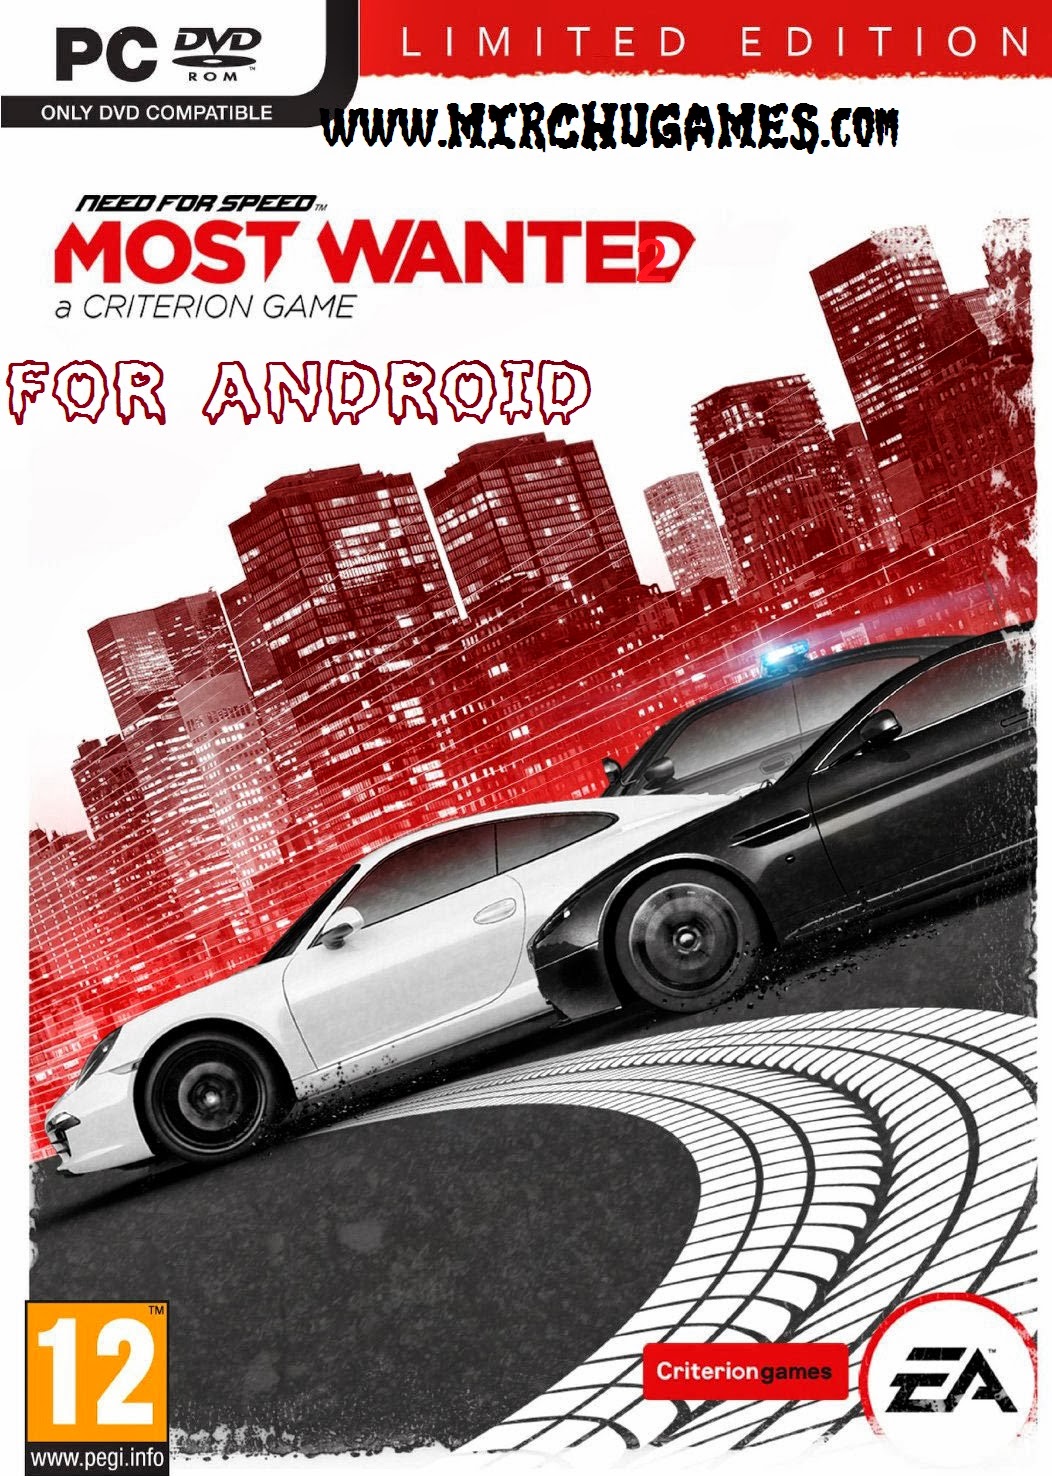 Download Data Need For Speed Most Wanted Android